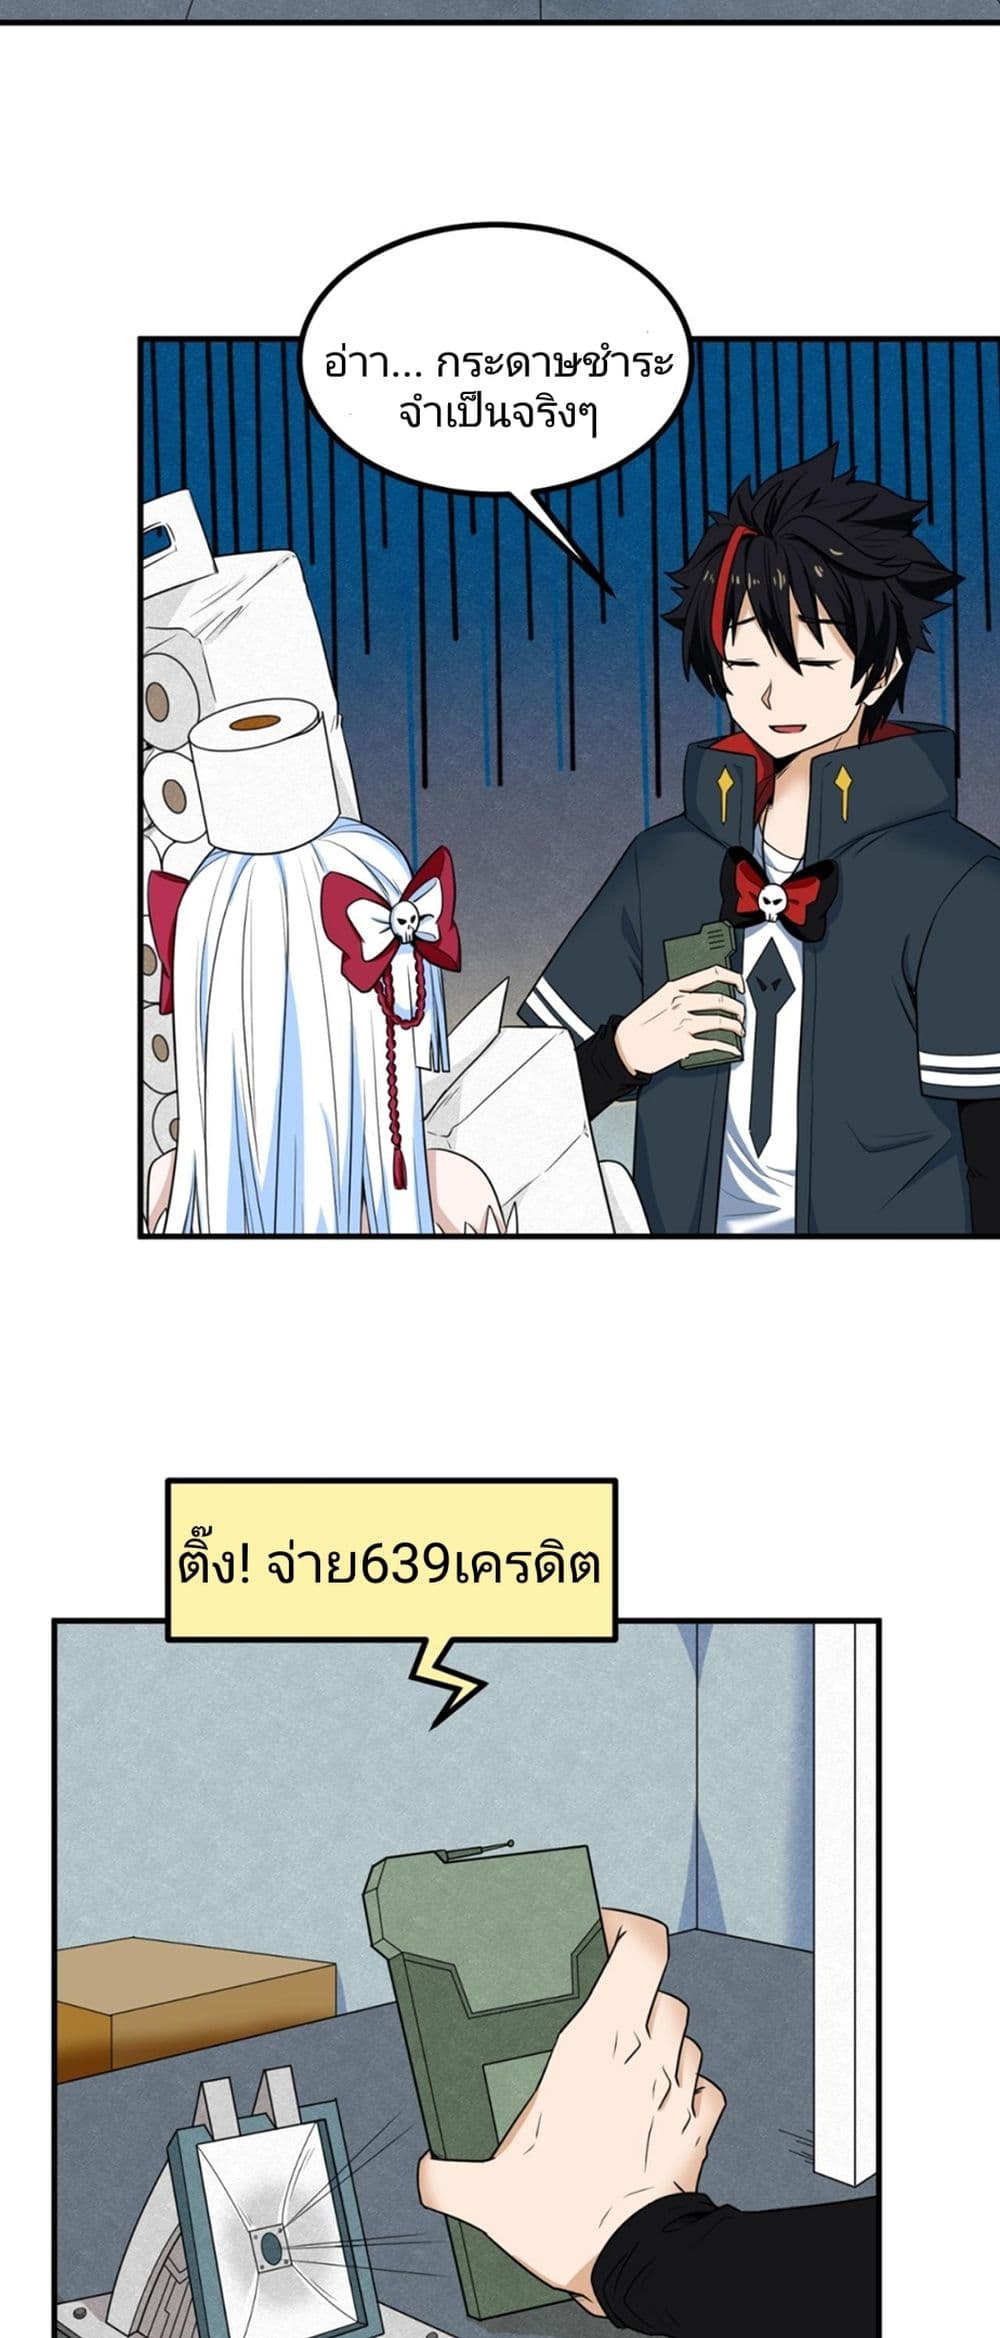 The Age of Ghost Spirits à¸à¸­à¸à¸à¸µà¹ 6 (9)